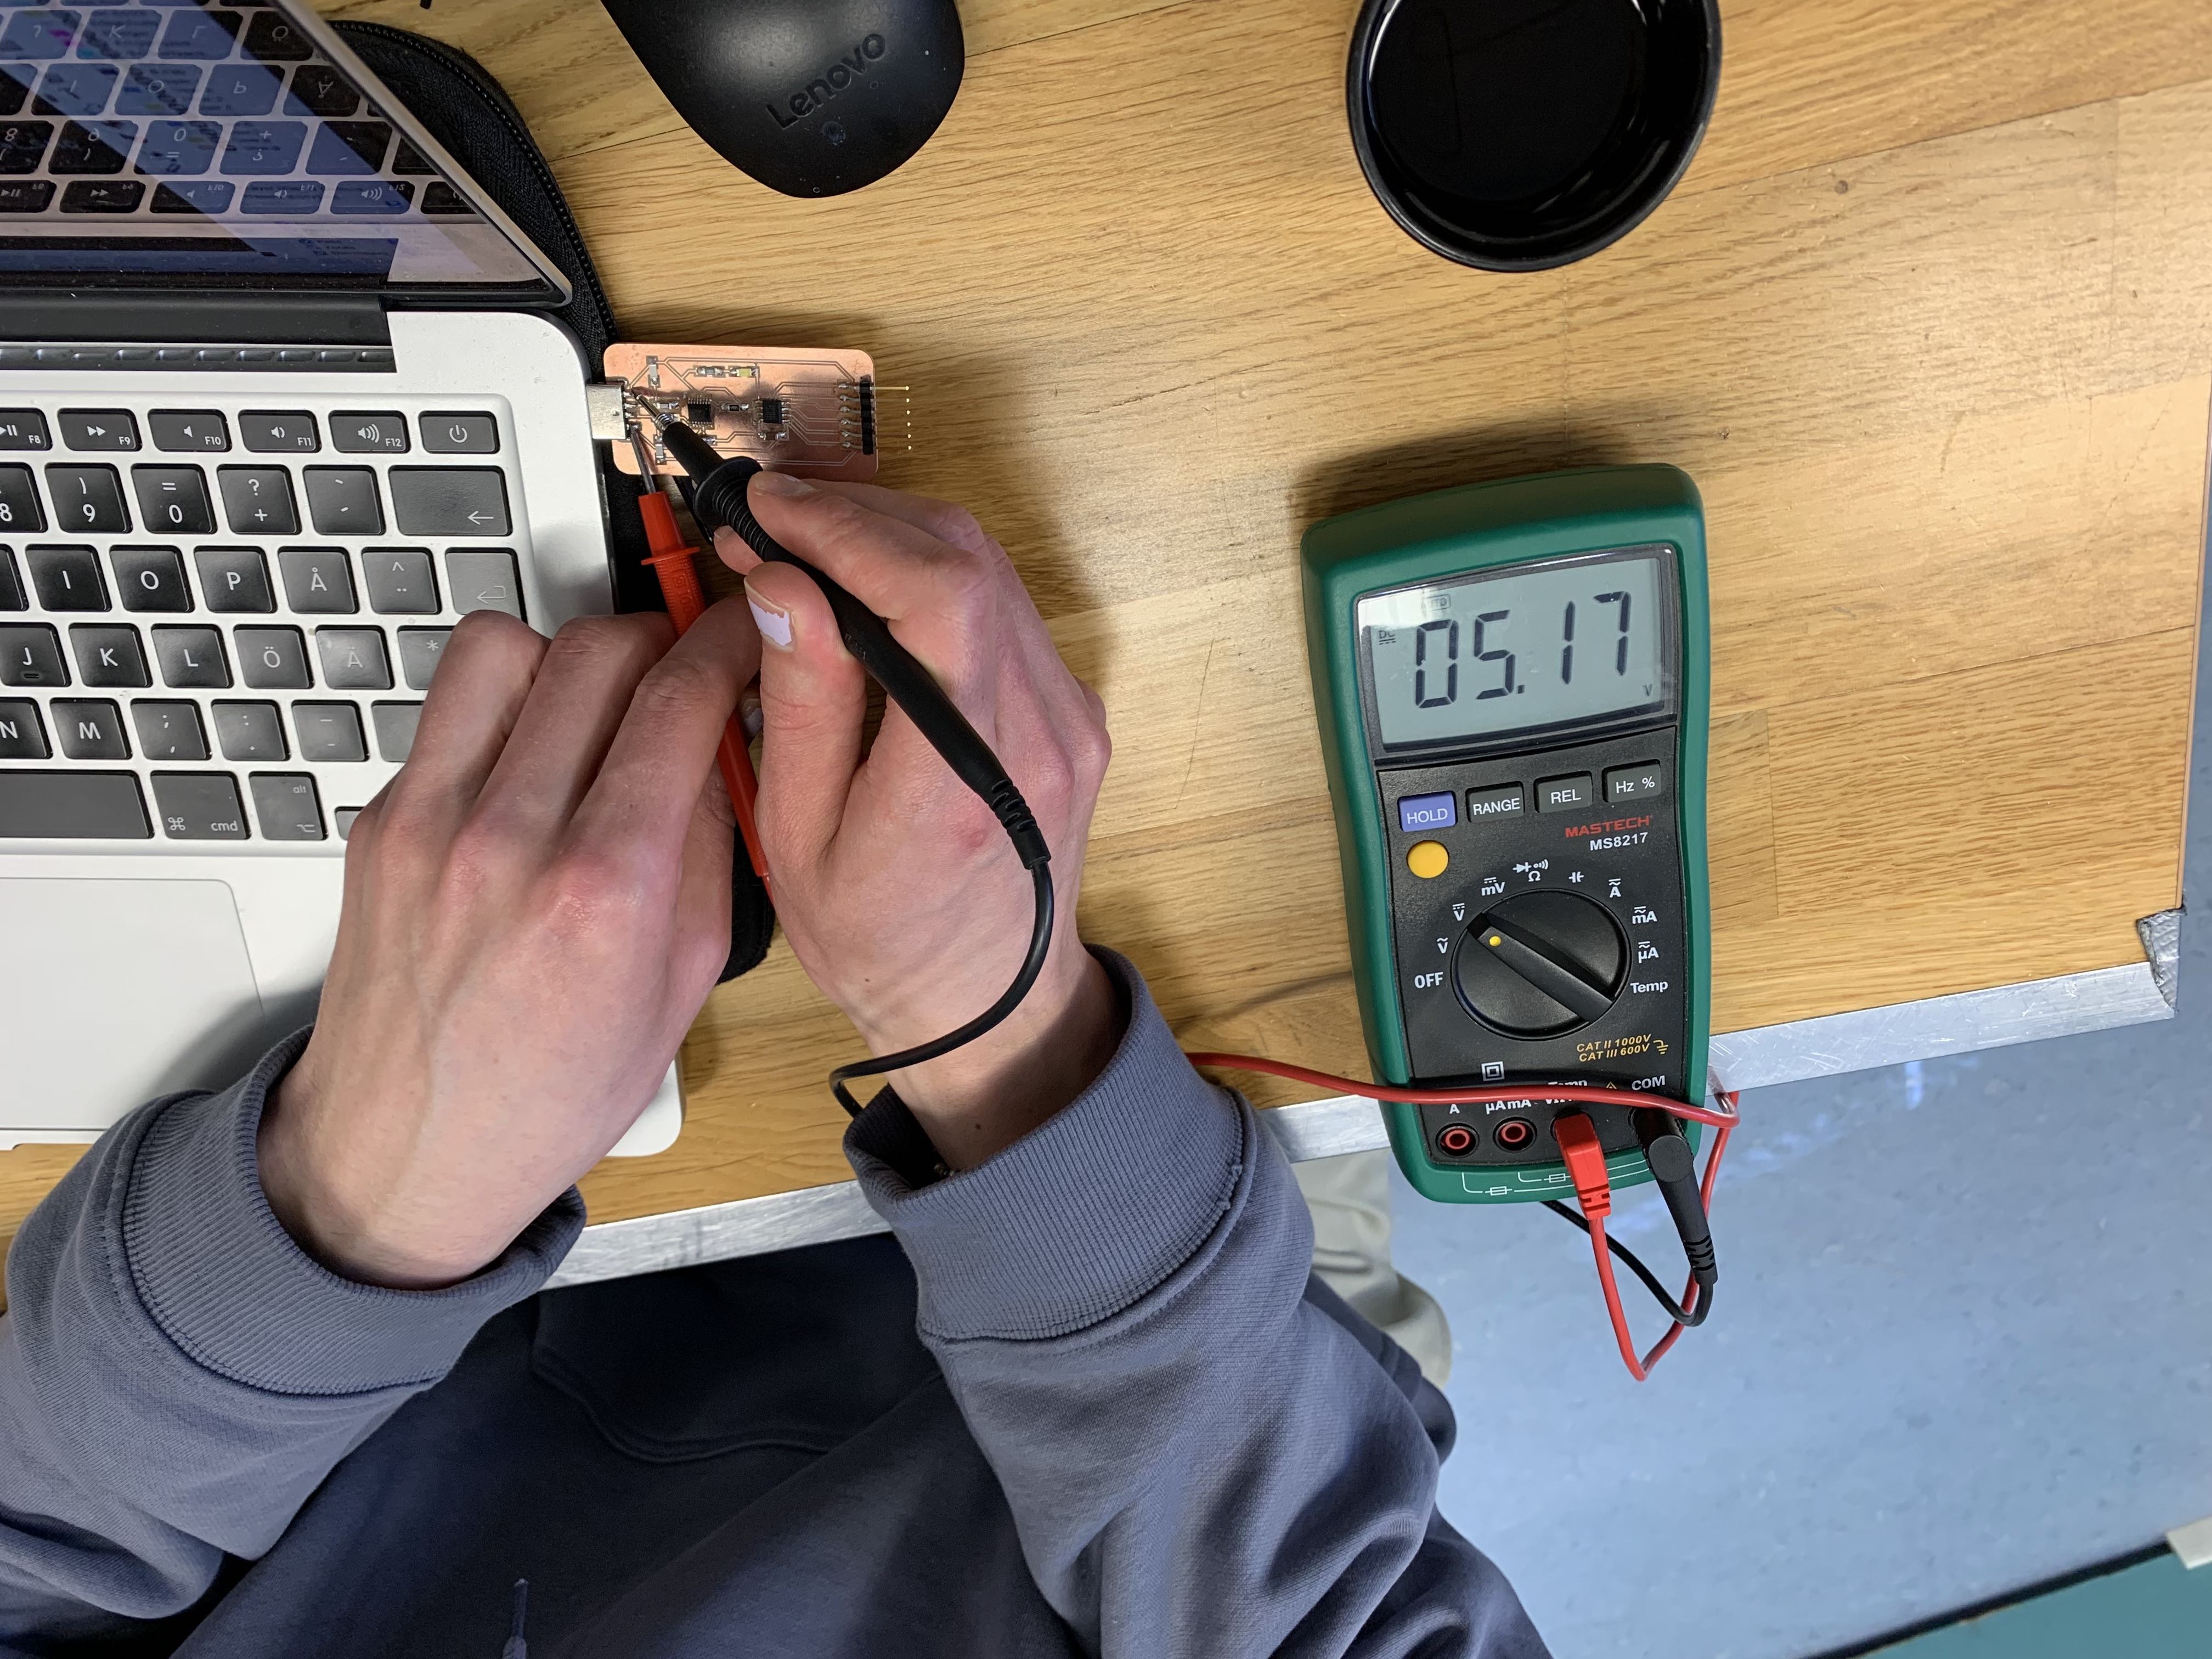 Multimeter being used to measure voltage